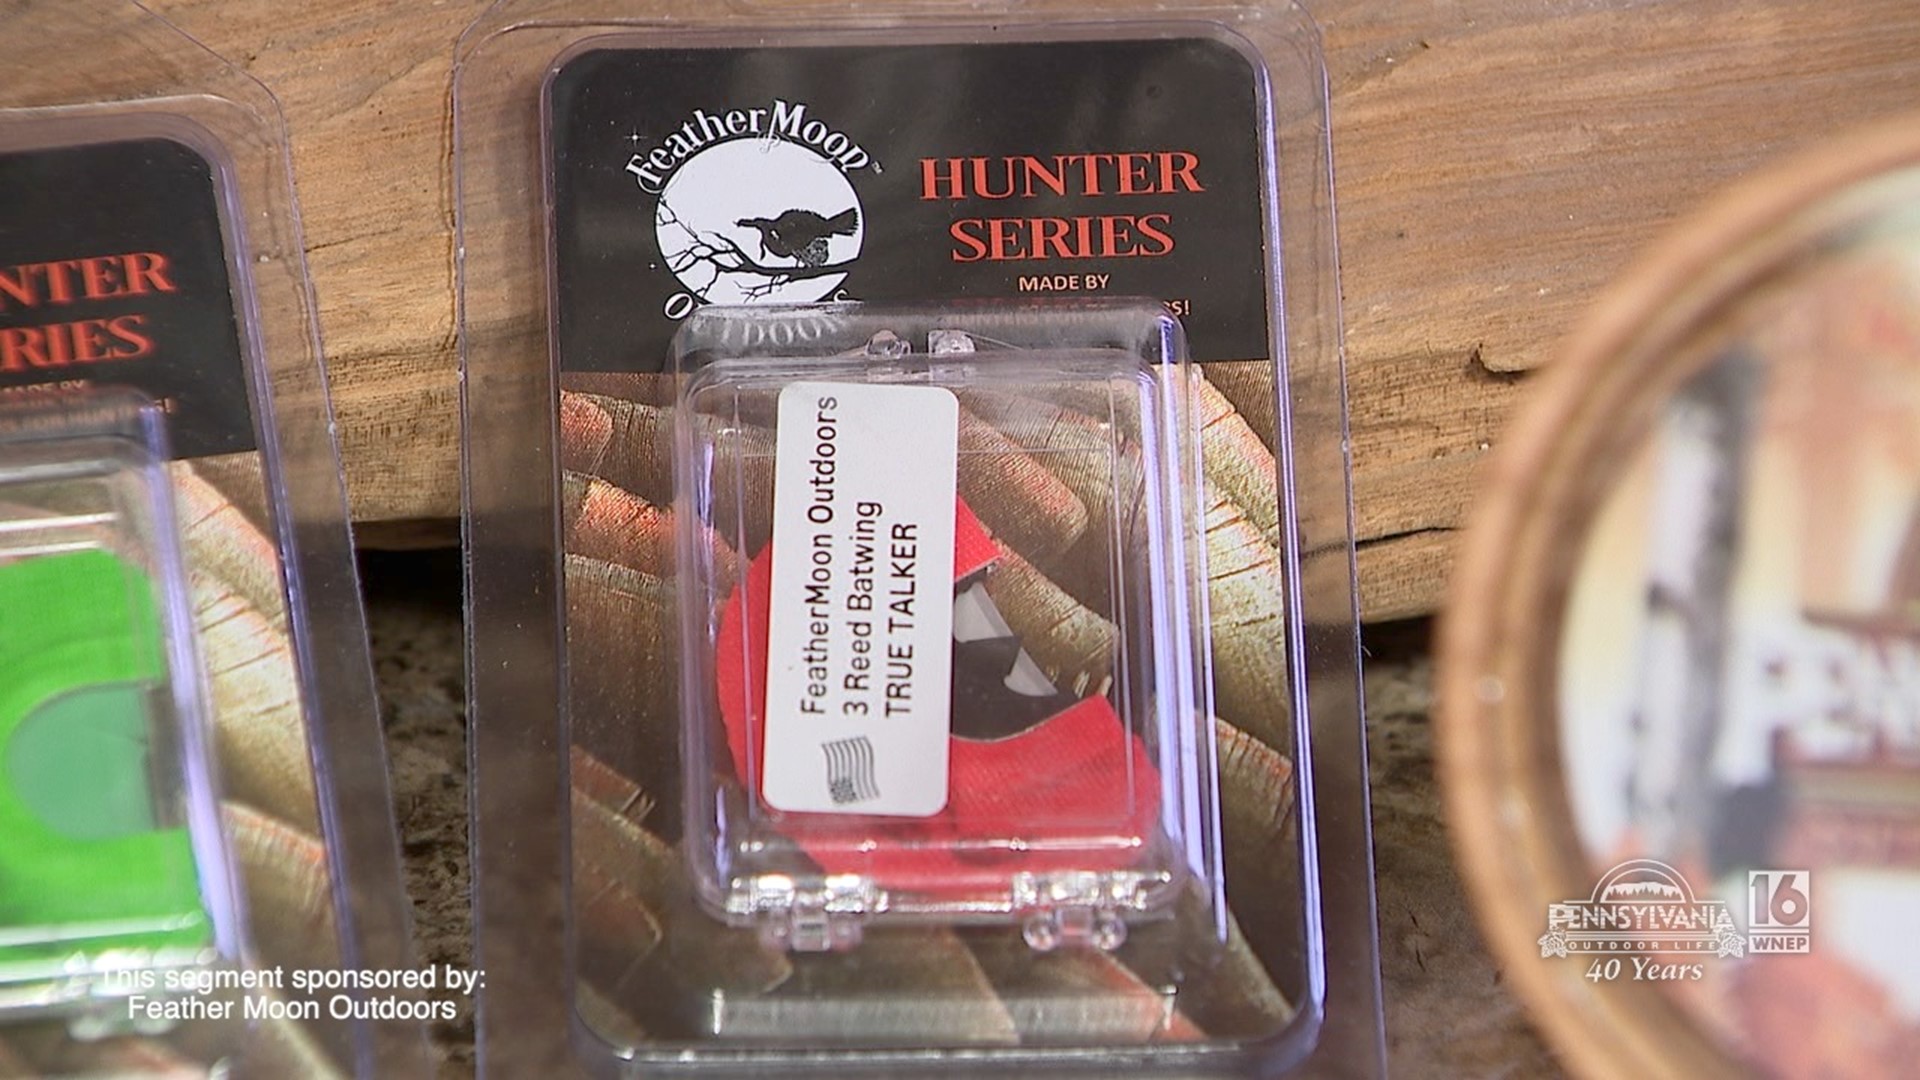 A great set of turkey calls that will surely improve your odd of bagging a gobbler.